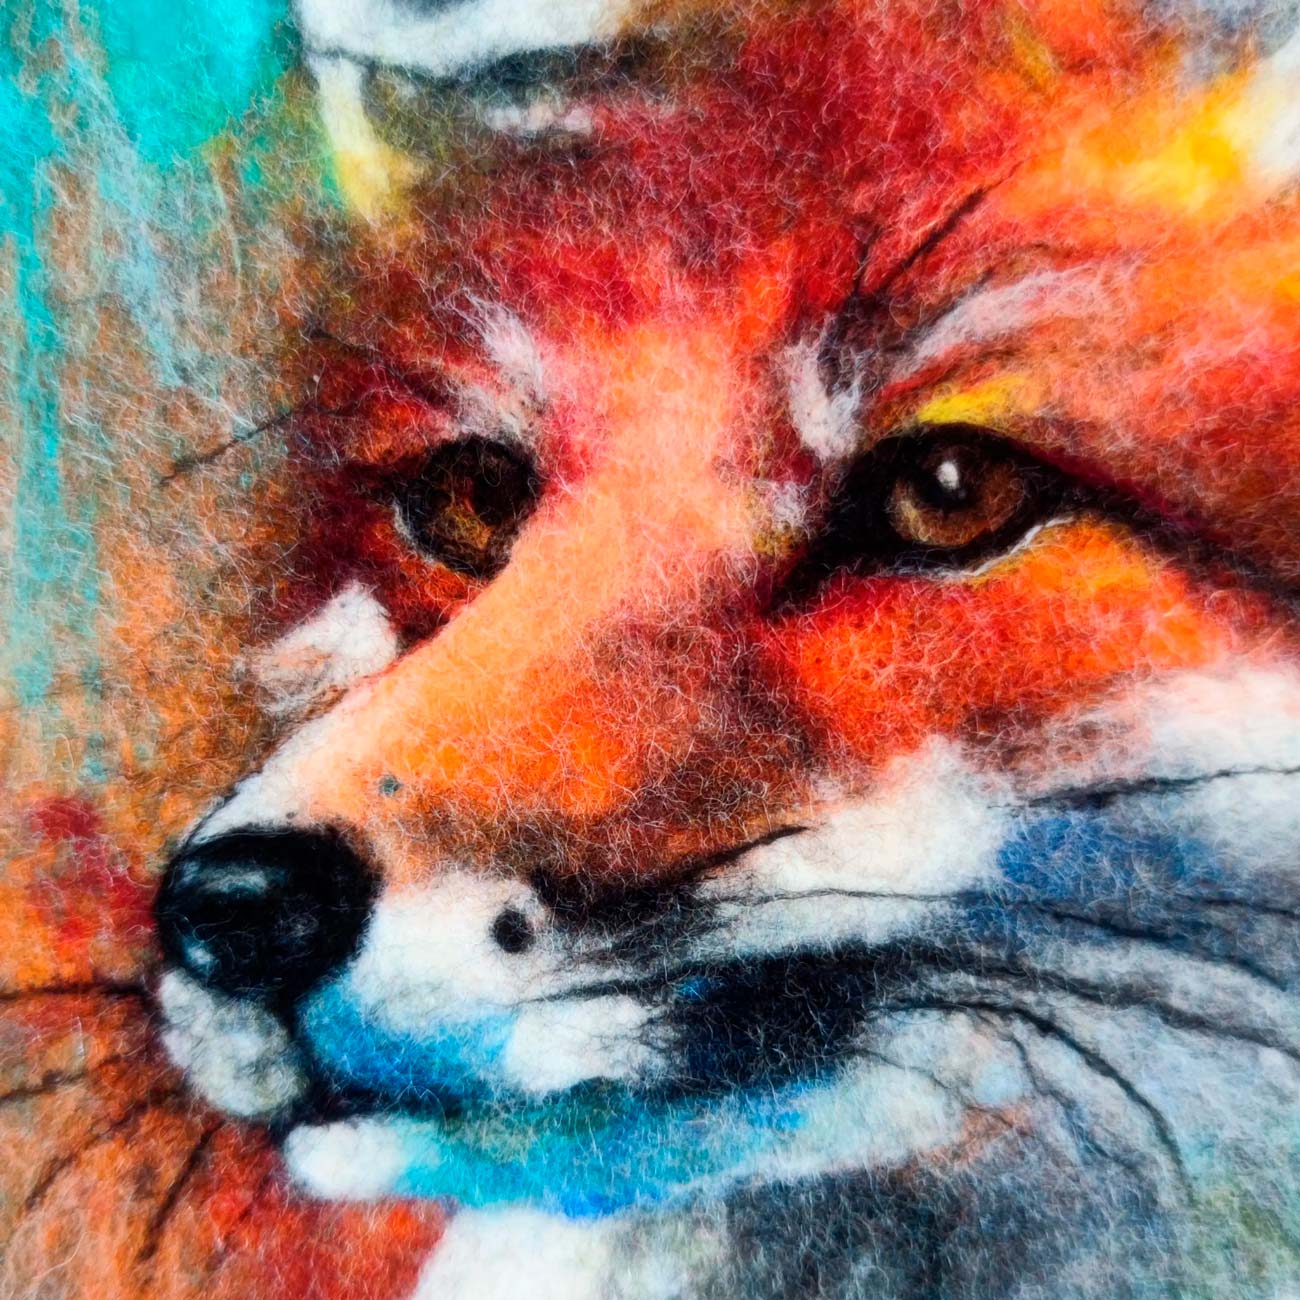 Wool Painting ”Fox in an Enchanting Sea of Flowers”, from the Whimsical Wildlife in Bloom collection